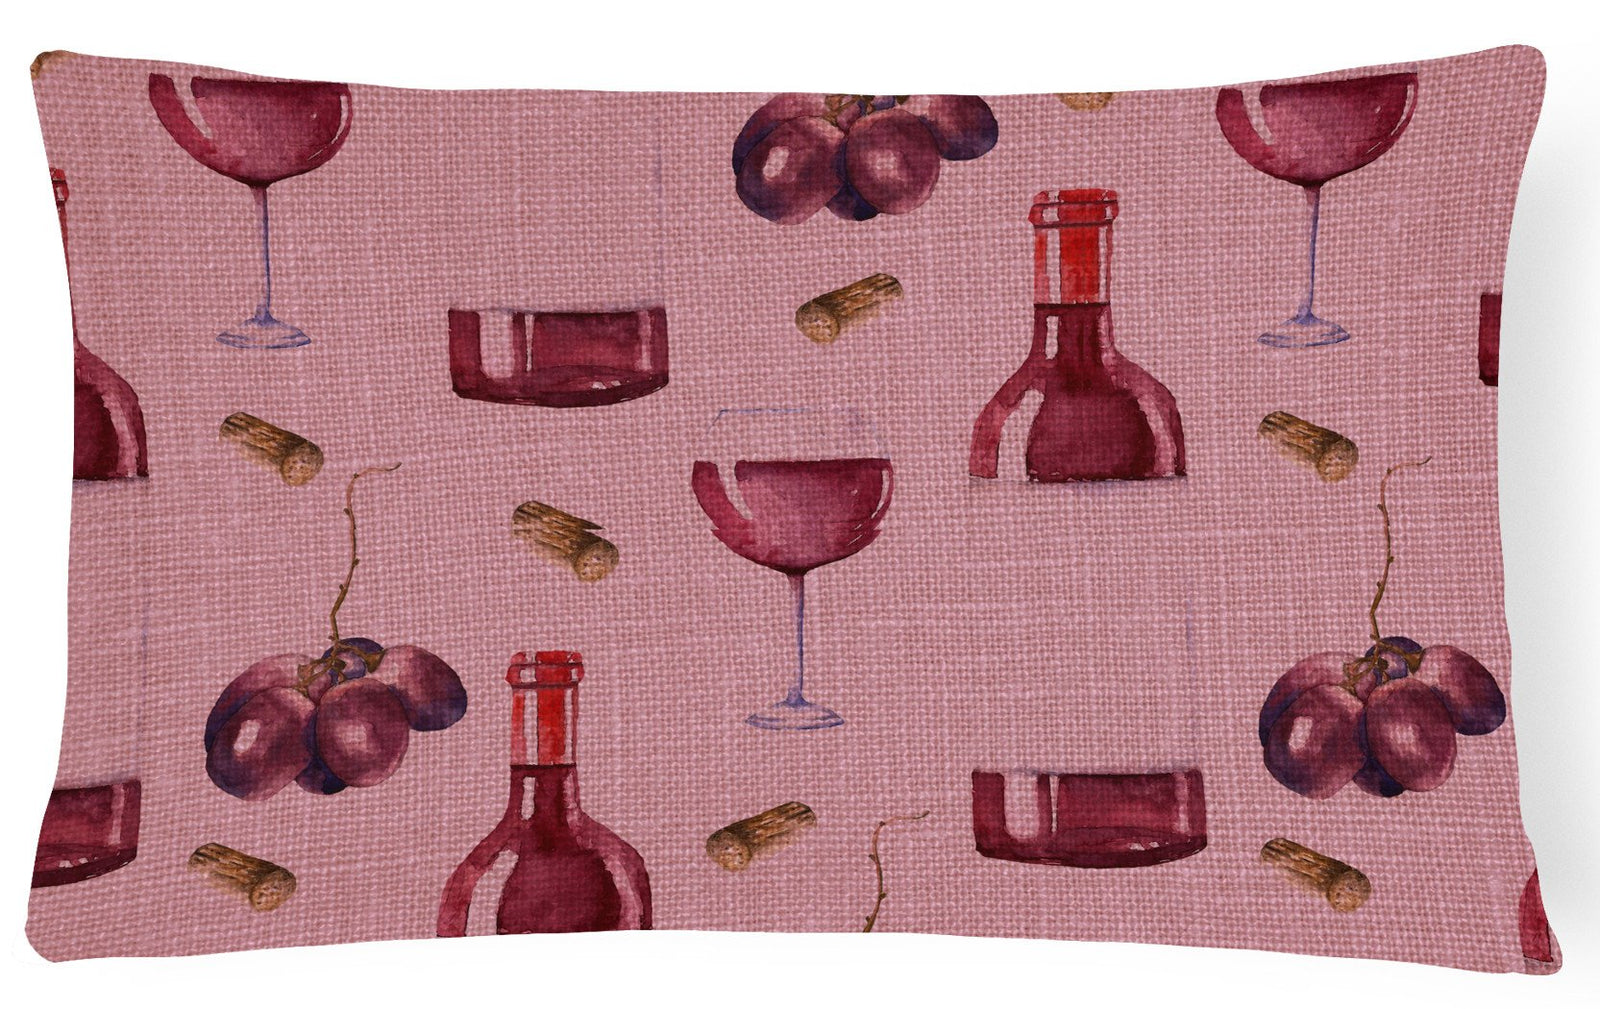 Red Wine on Linen Canvas Fabric Decorative Pillow BB5195PW1216 by Caroline's Treasures